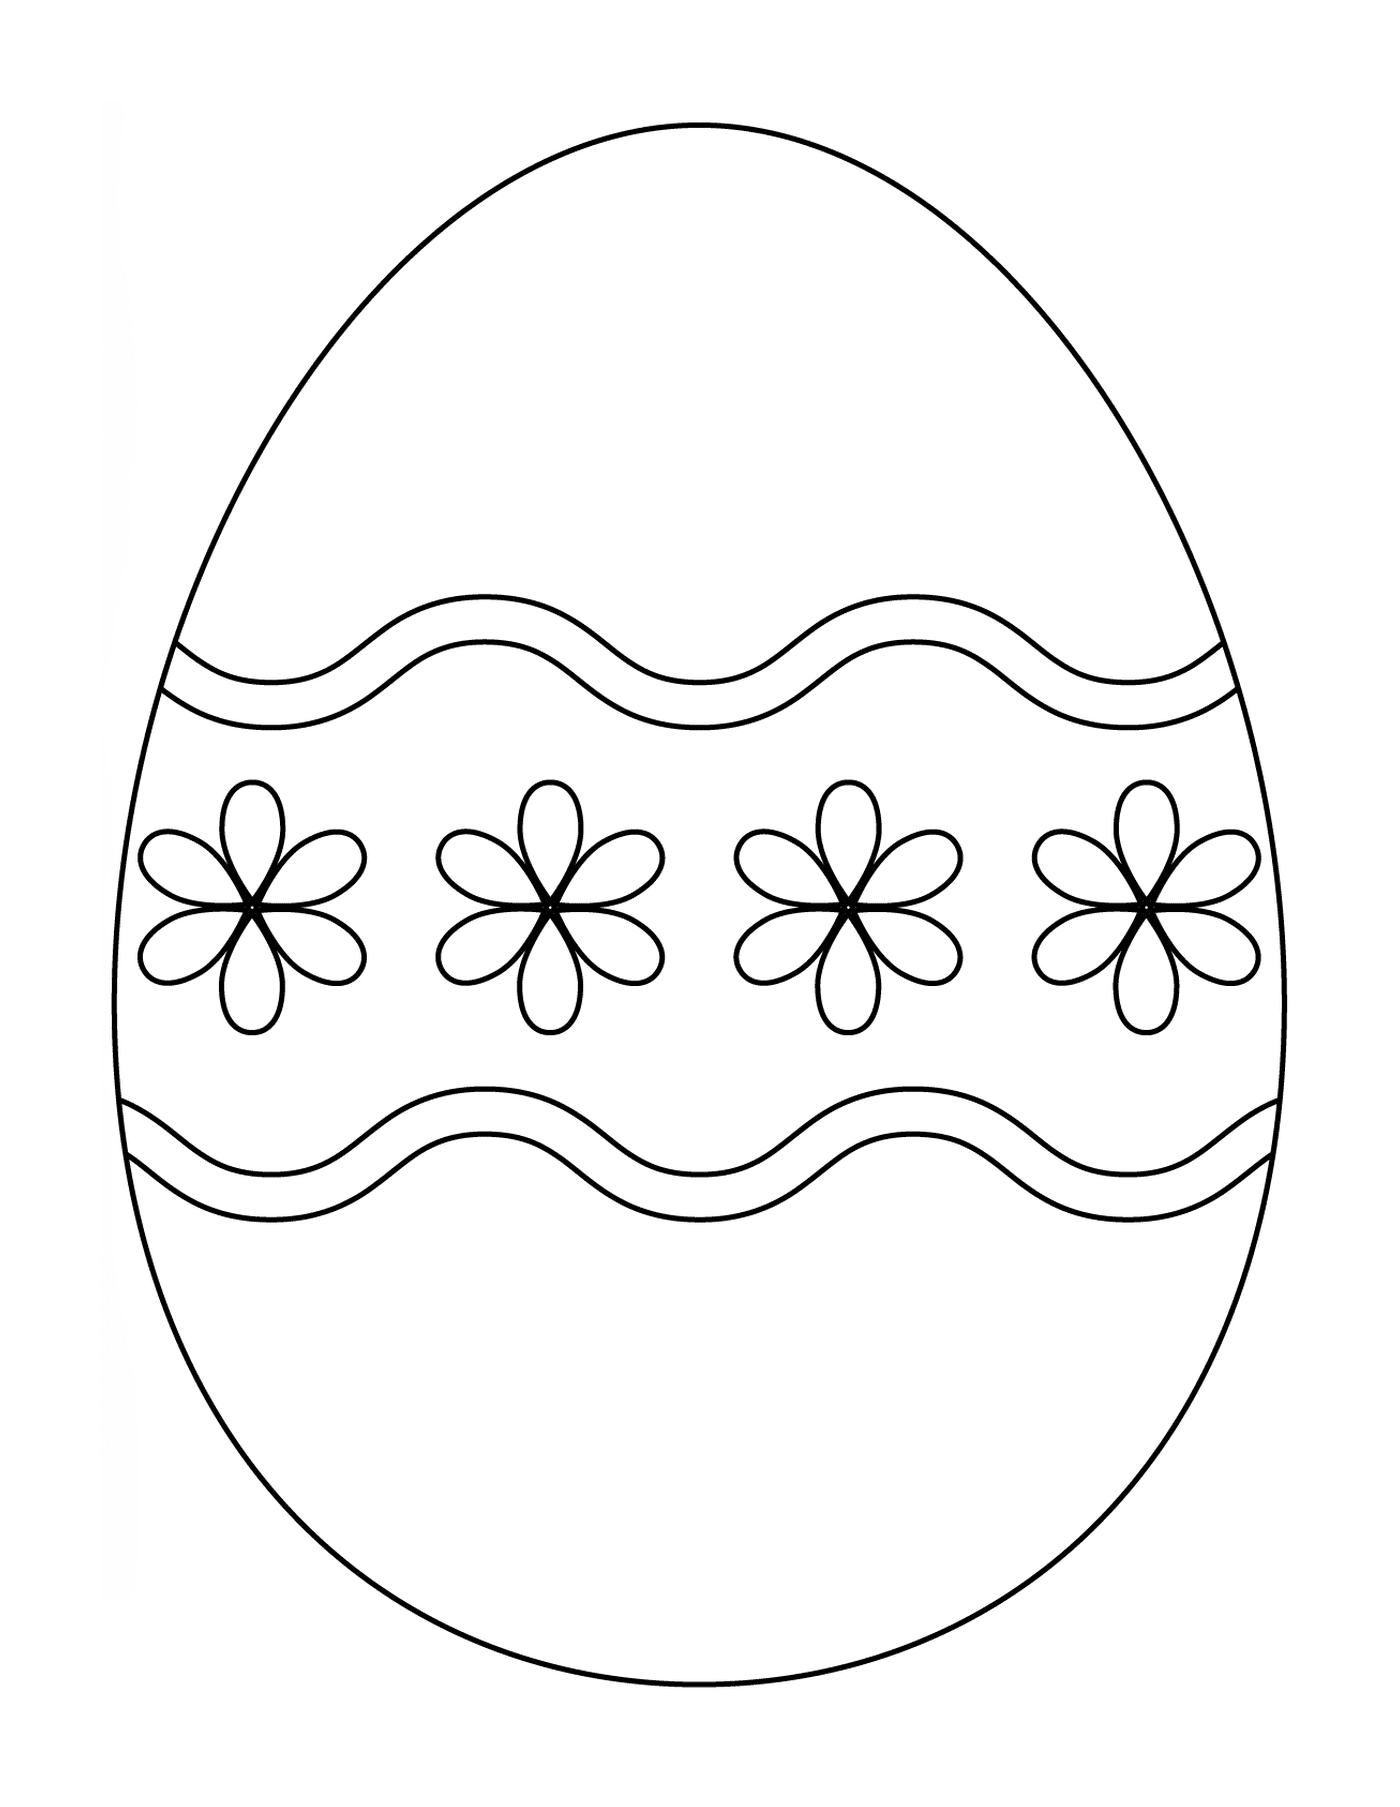  Easter egg with a simple floral pattern 